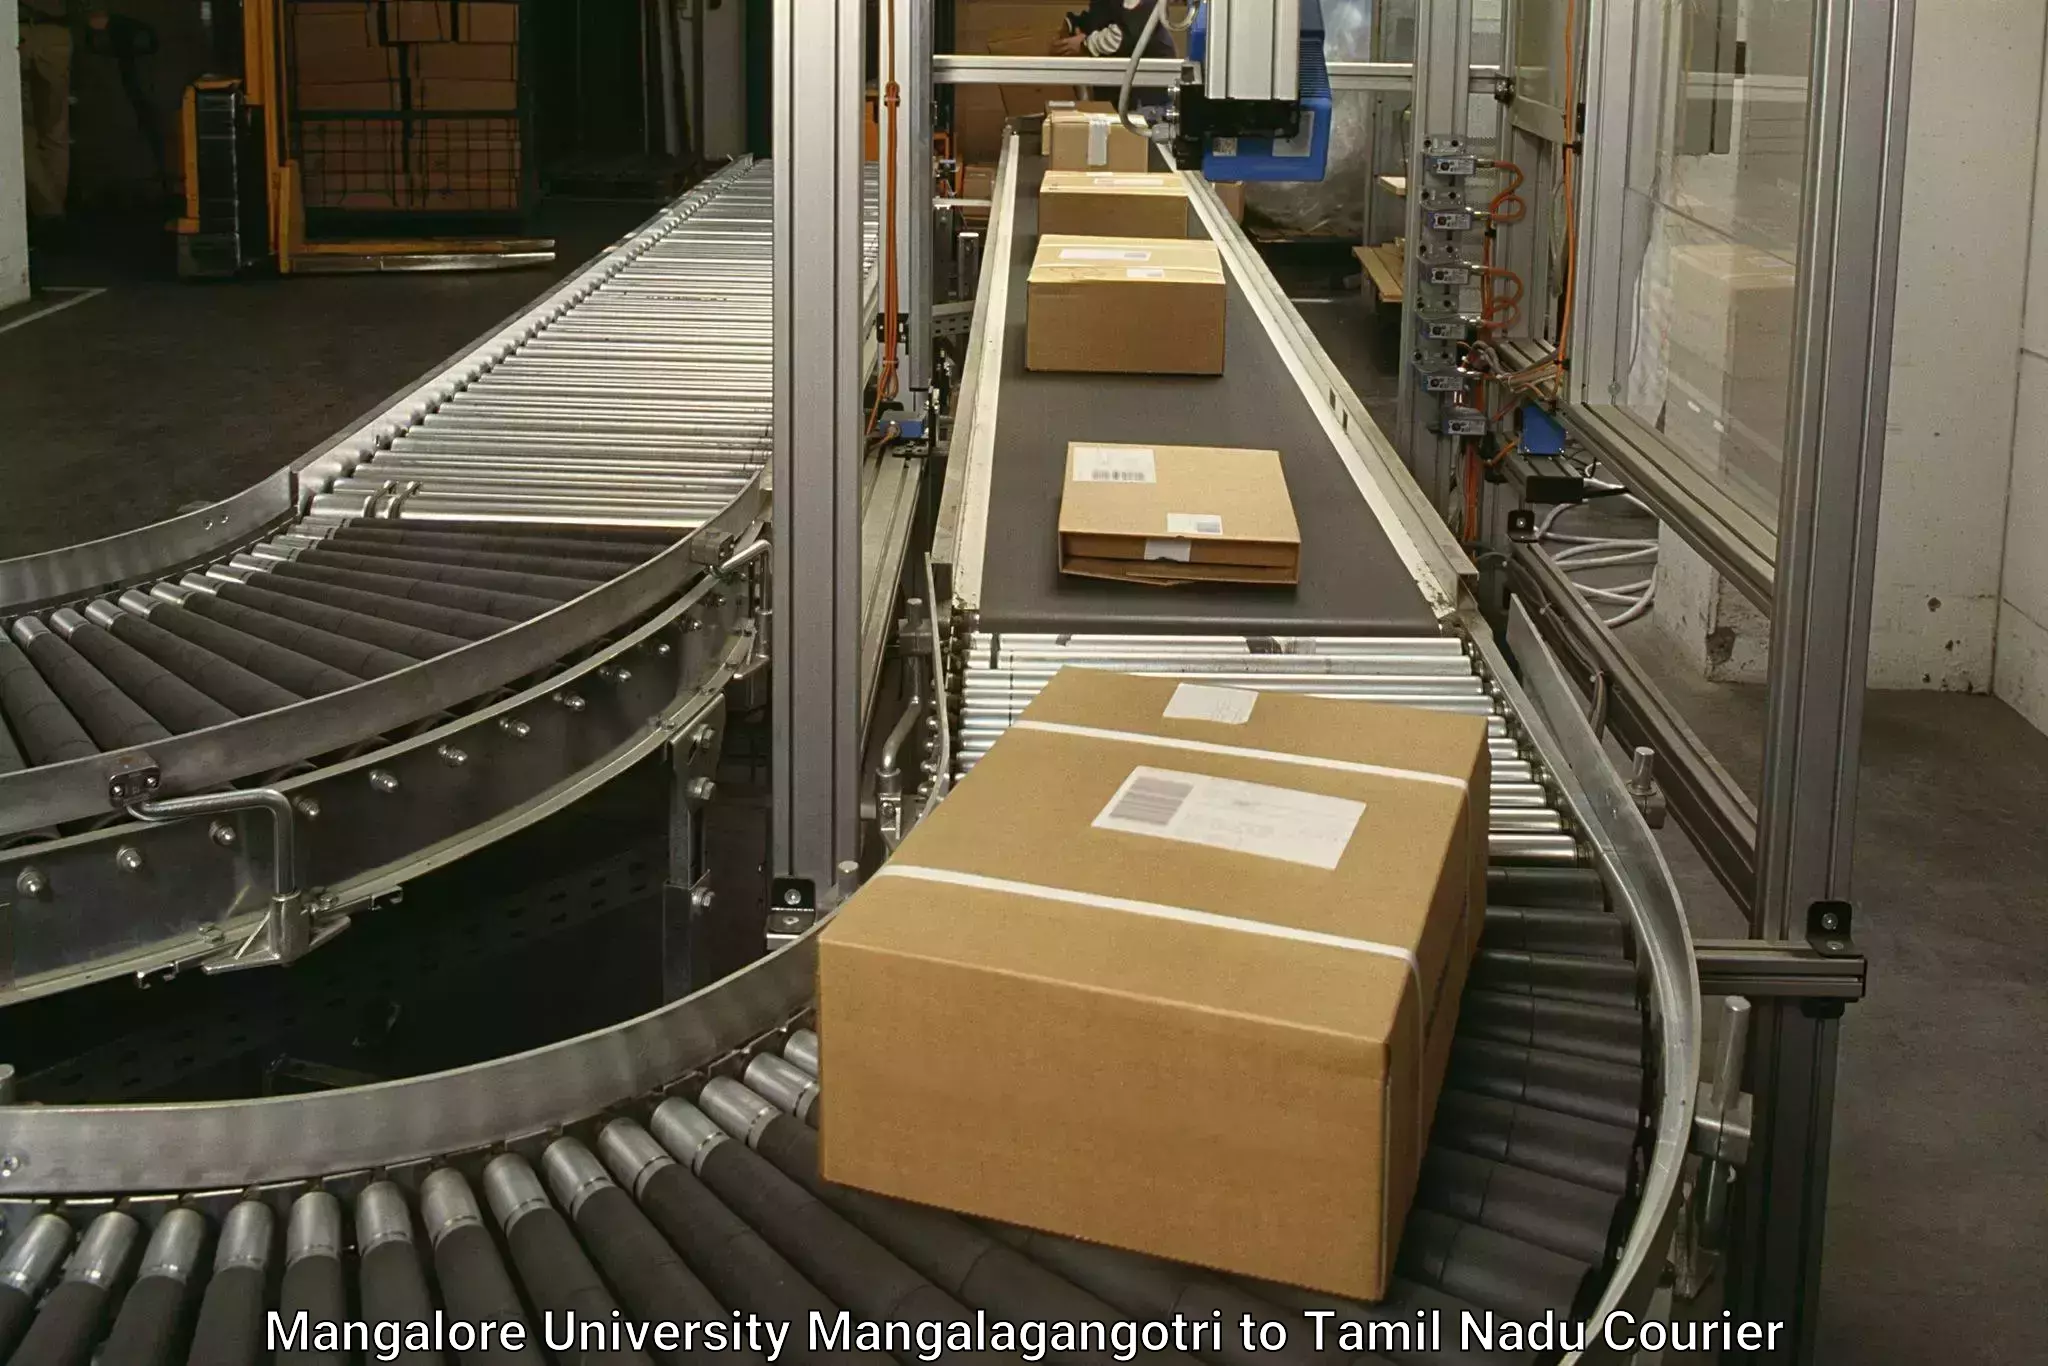 Expedited parcel delivery Mangalore University Mangalagangotri to SRM Institute of Science and Technology Chennai